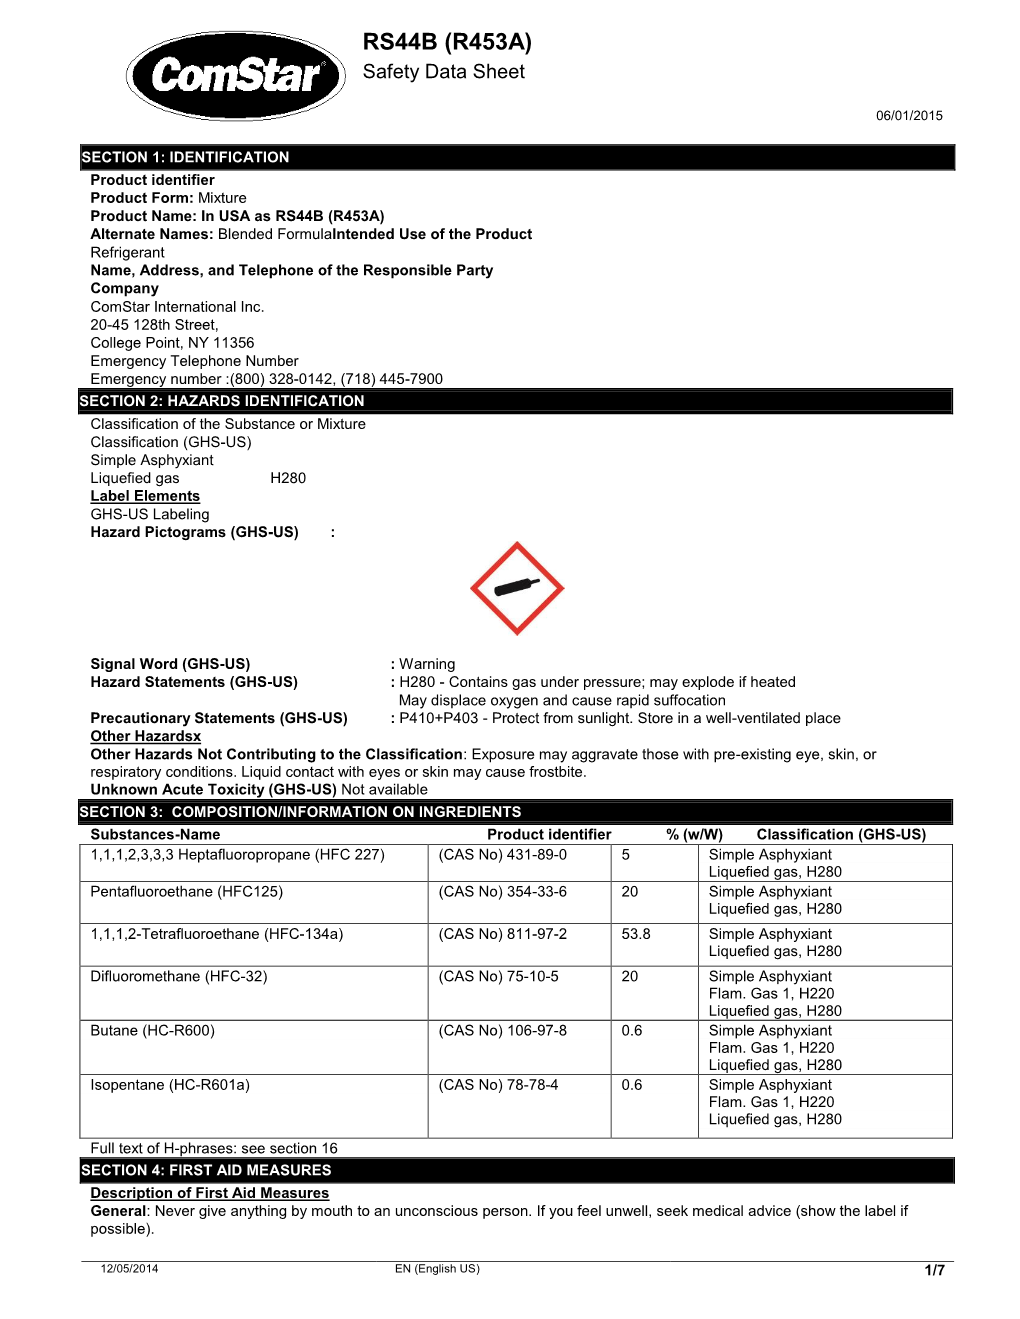 RS44B (R453A) Safety Data Sheet